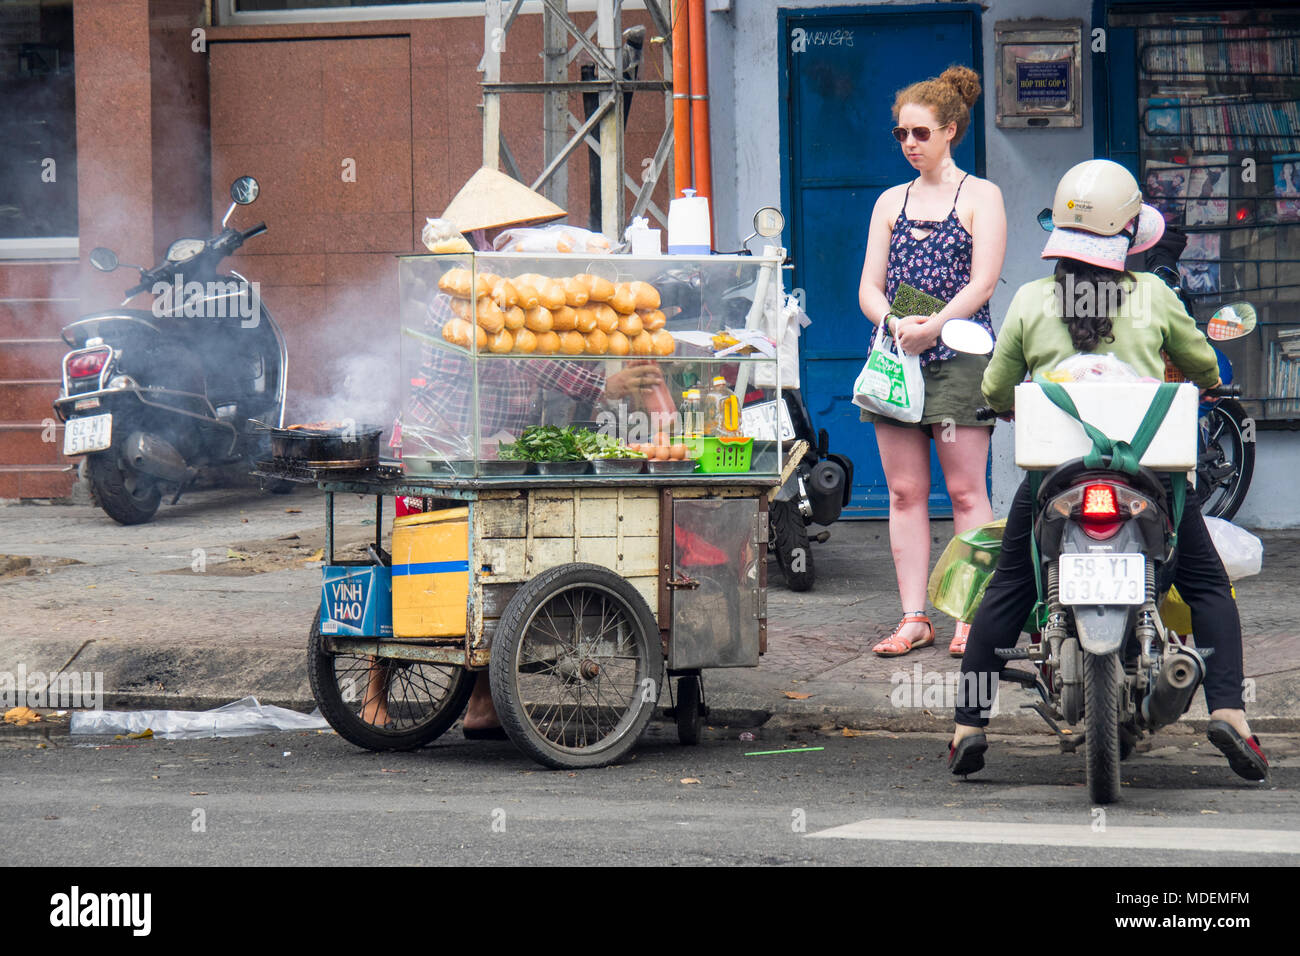 A tourist buying banh mi from a street vendor in Ho Chi MInh City, Vietnam. Stock Photo